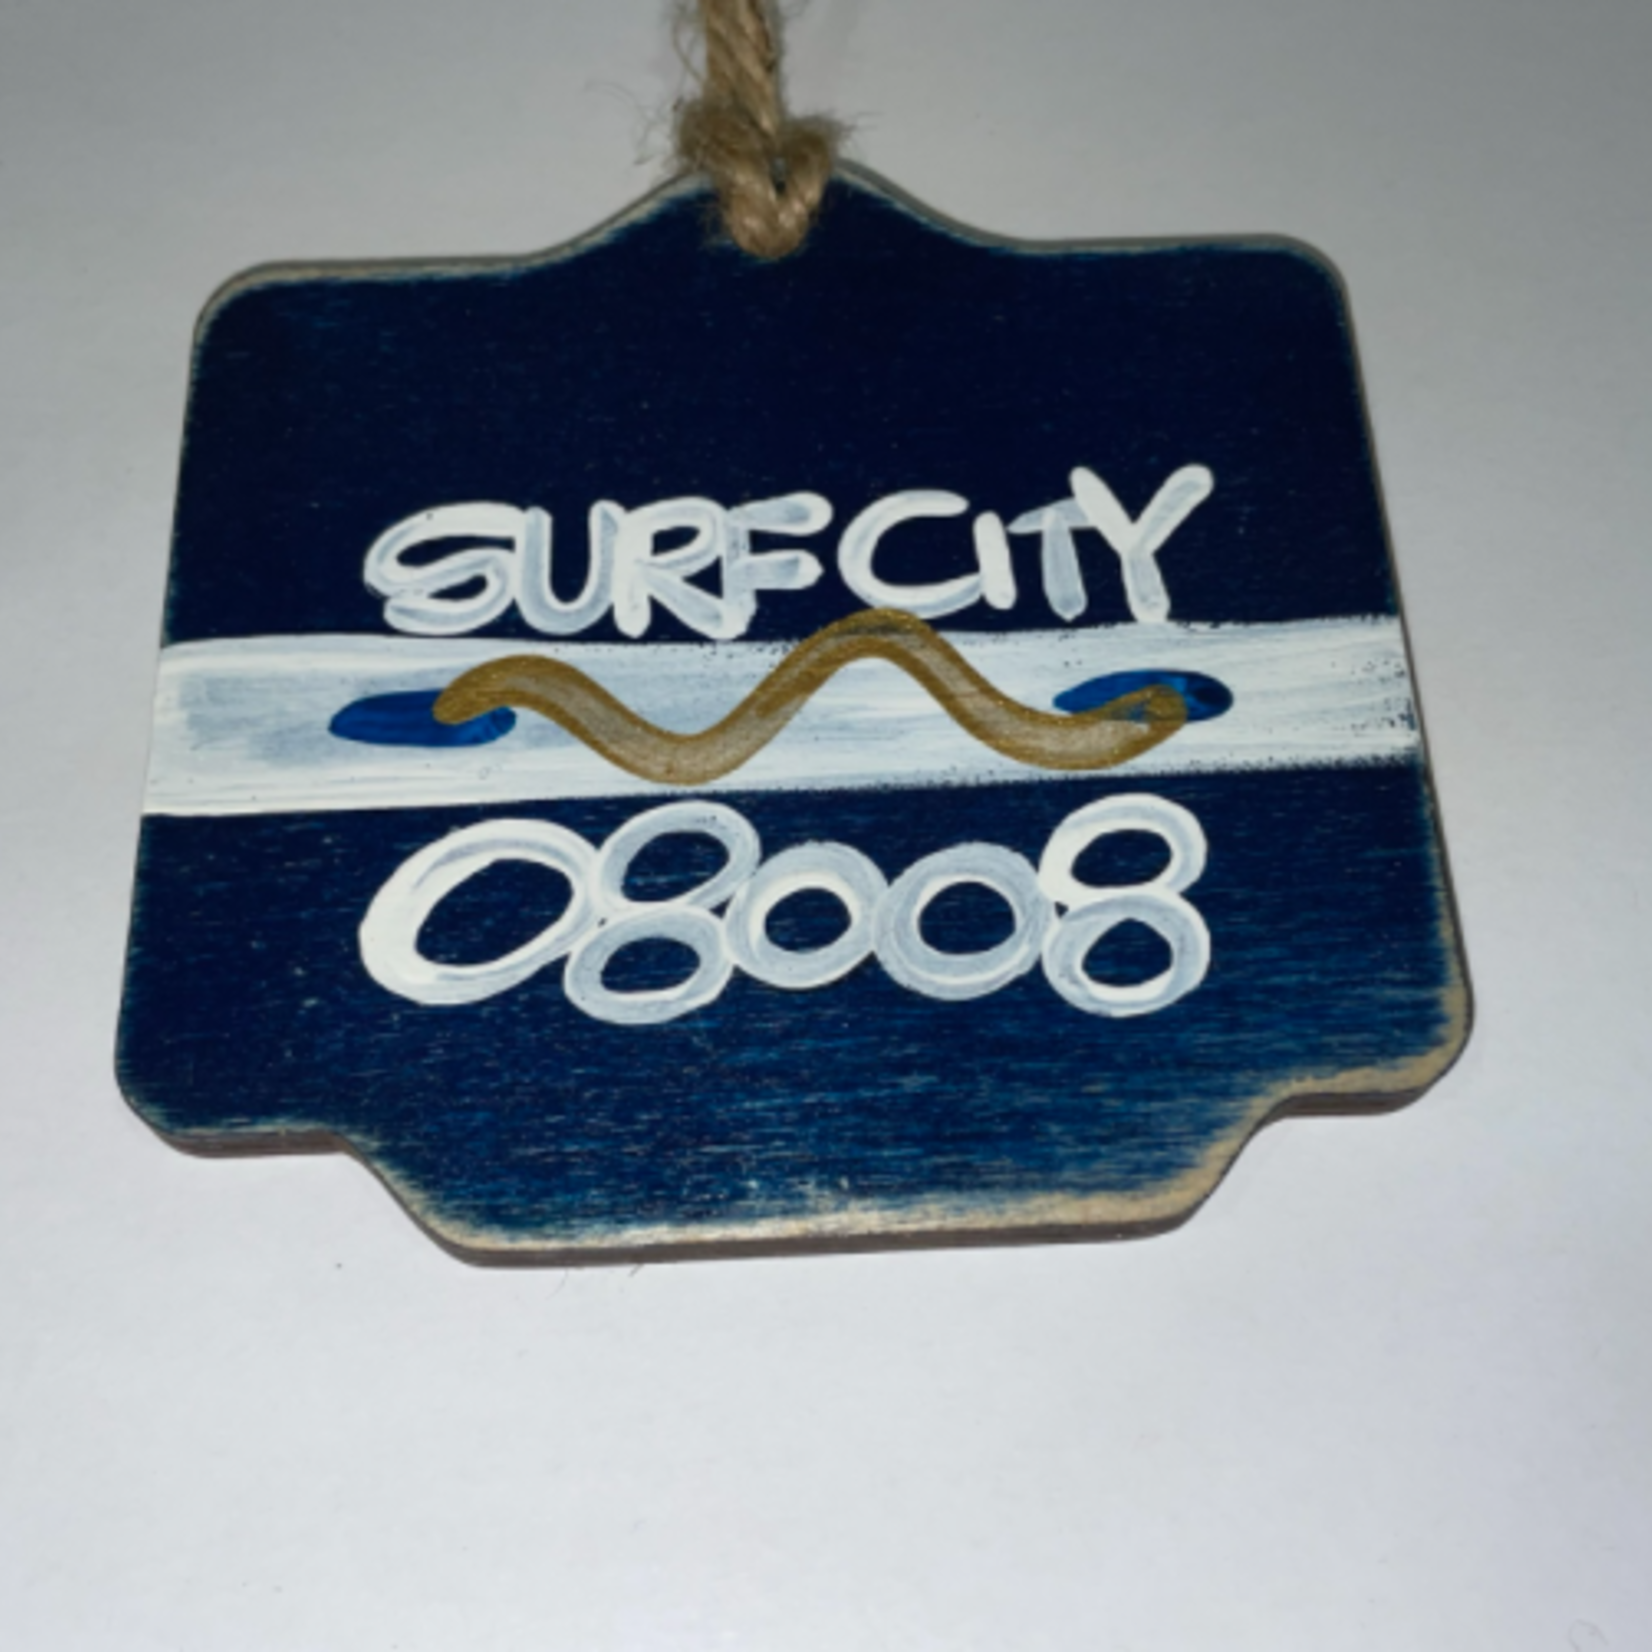 Beach Badge Ornament With Zip Navy Surf City